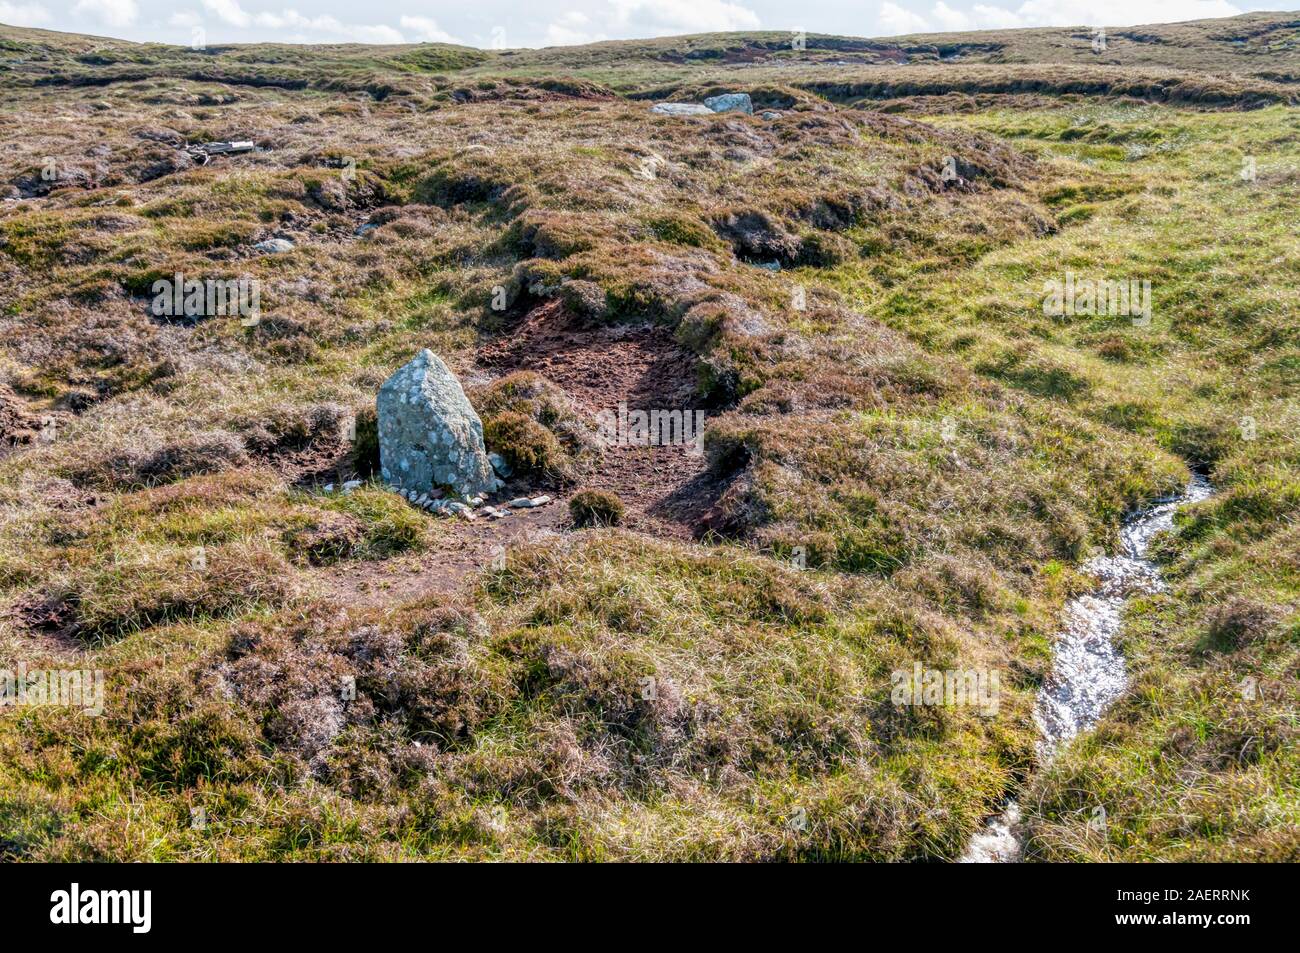 Stone marking the burial place of Gunnister Man at Gunnister in Northmavine, Shetland.  DETAILS IN DESCRIPTION. Stock Photo